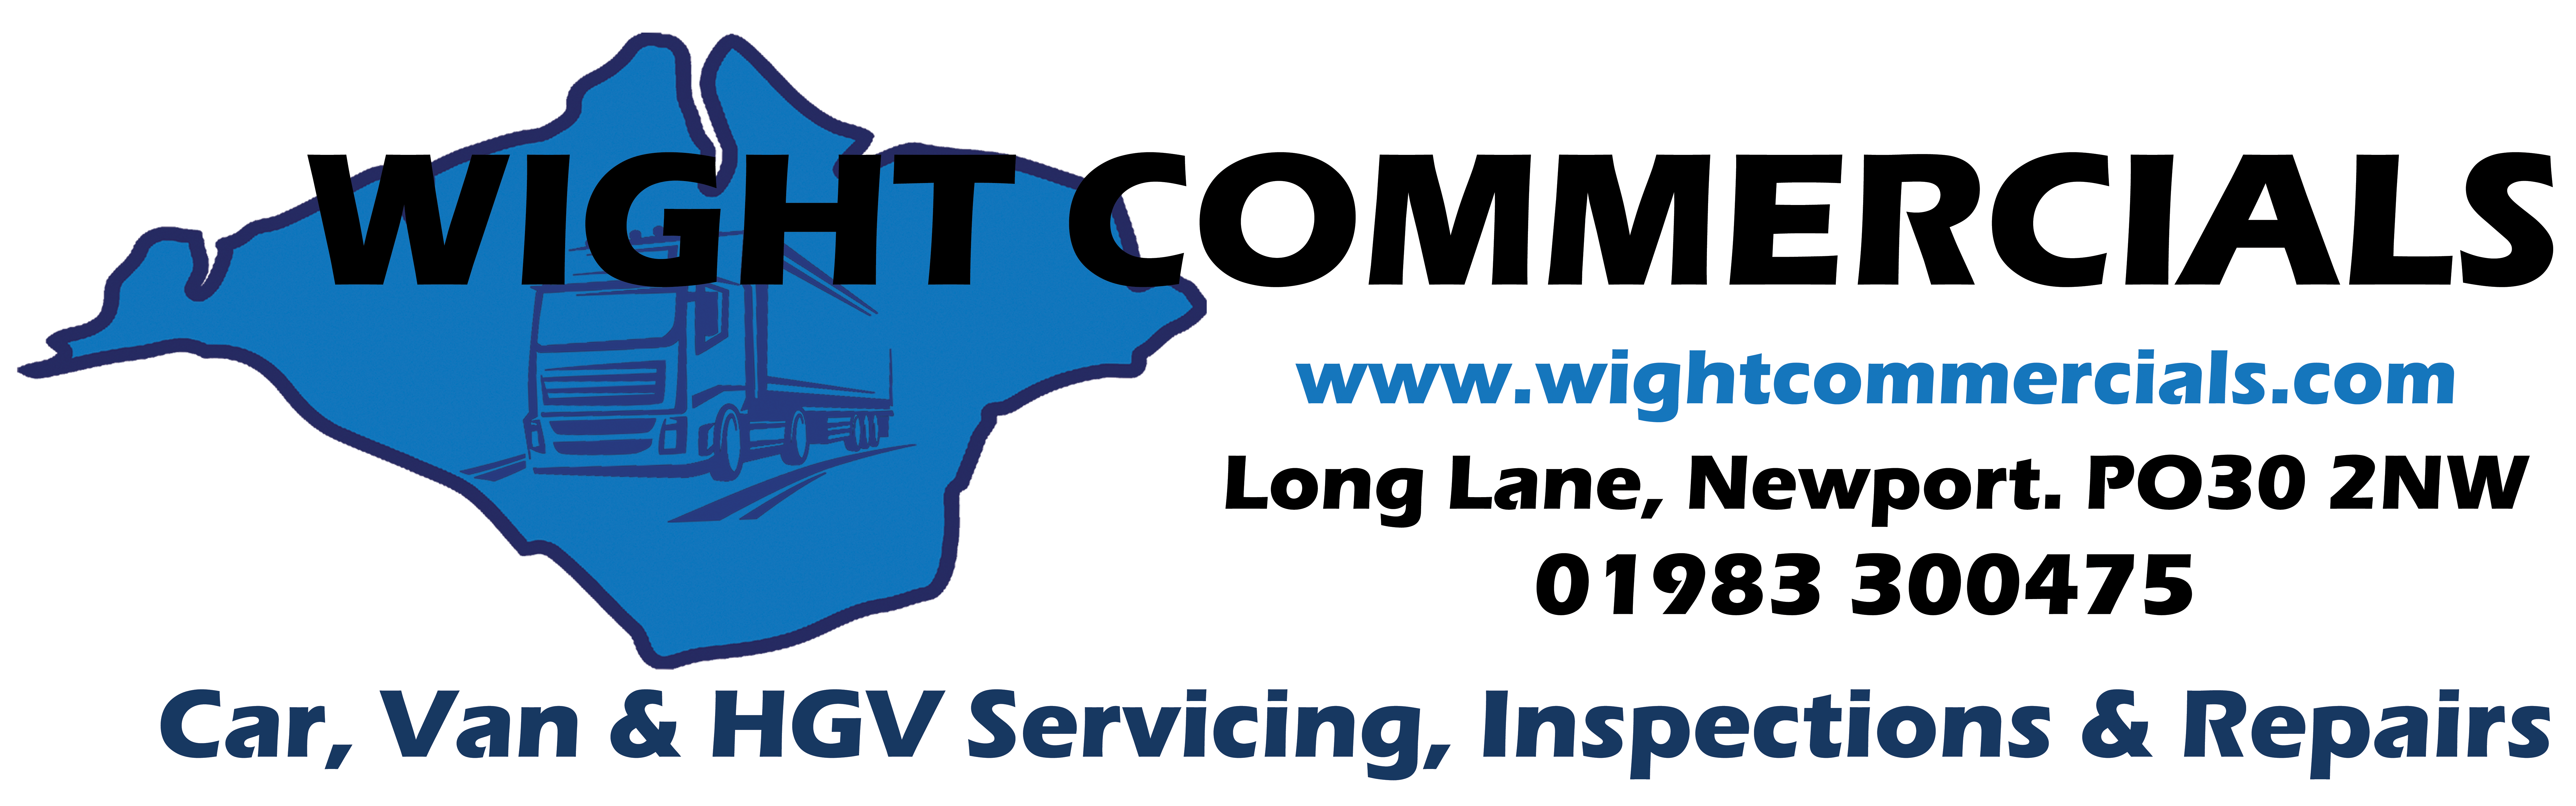 Wight Commercials